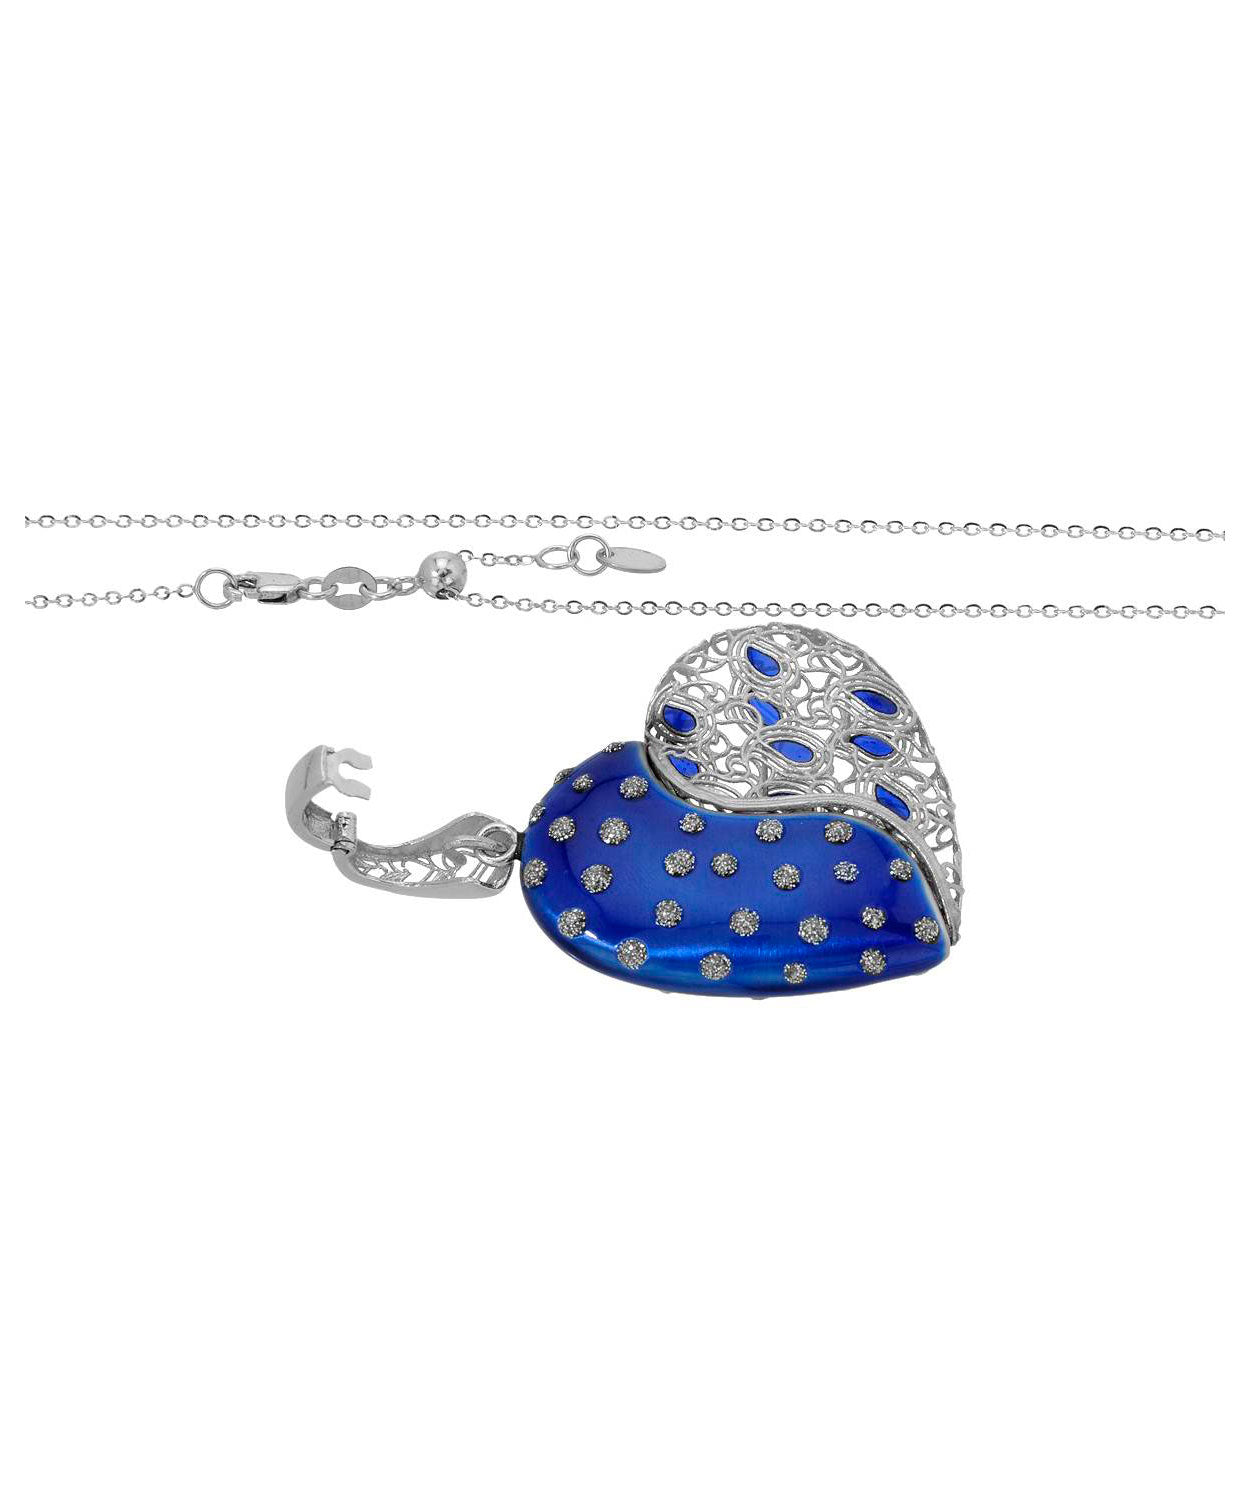 Patterns of Love Collection 14k Gold & Enamel Heart Pendant With Chain - Made in Italy View 2